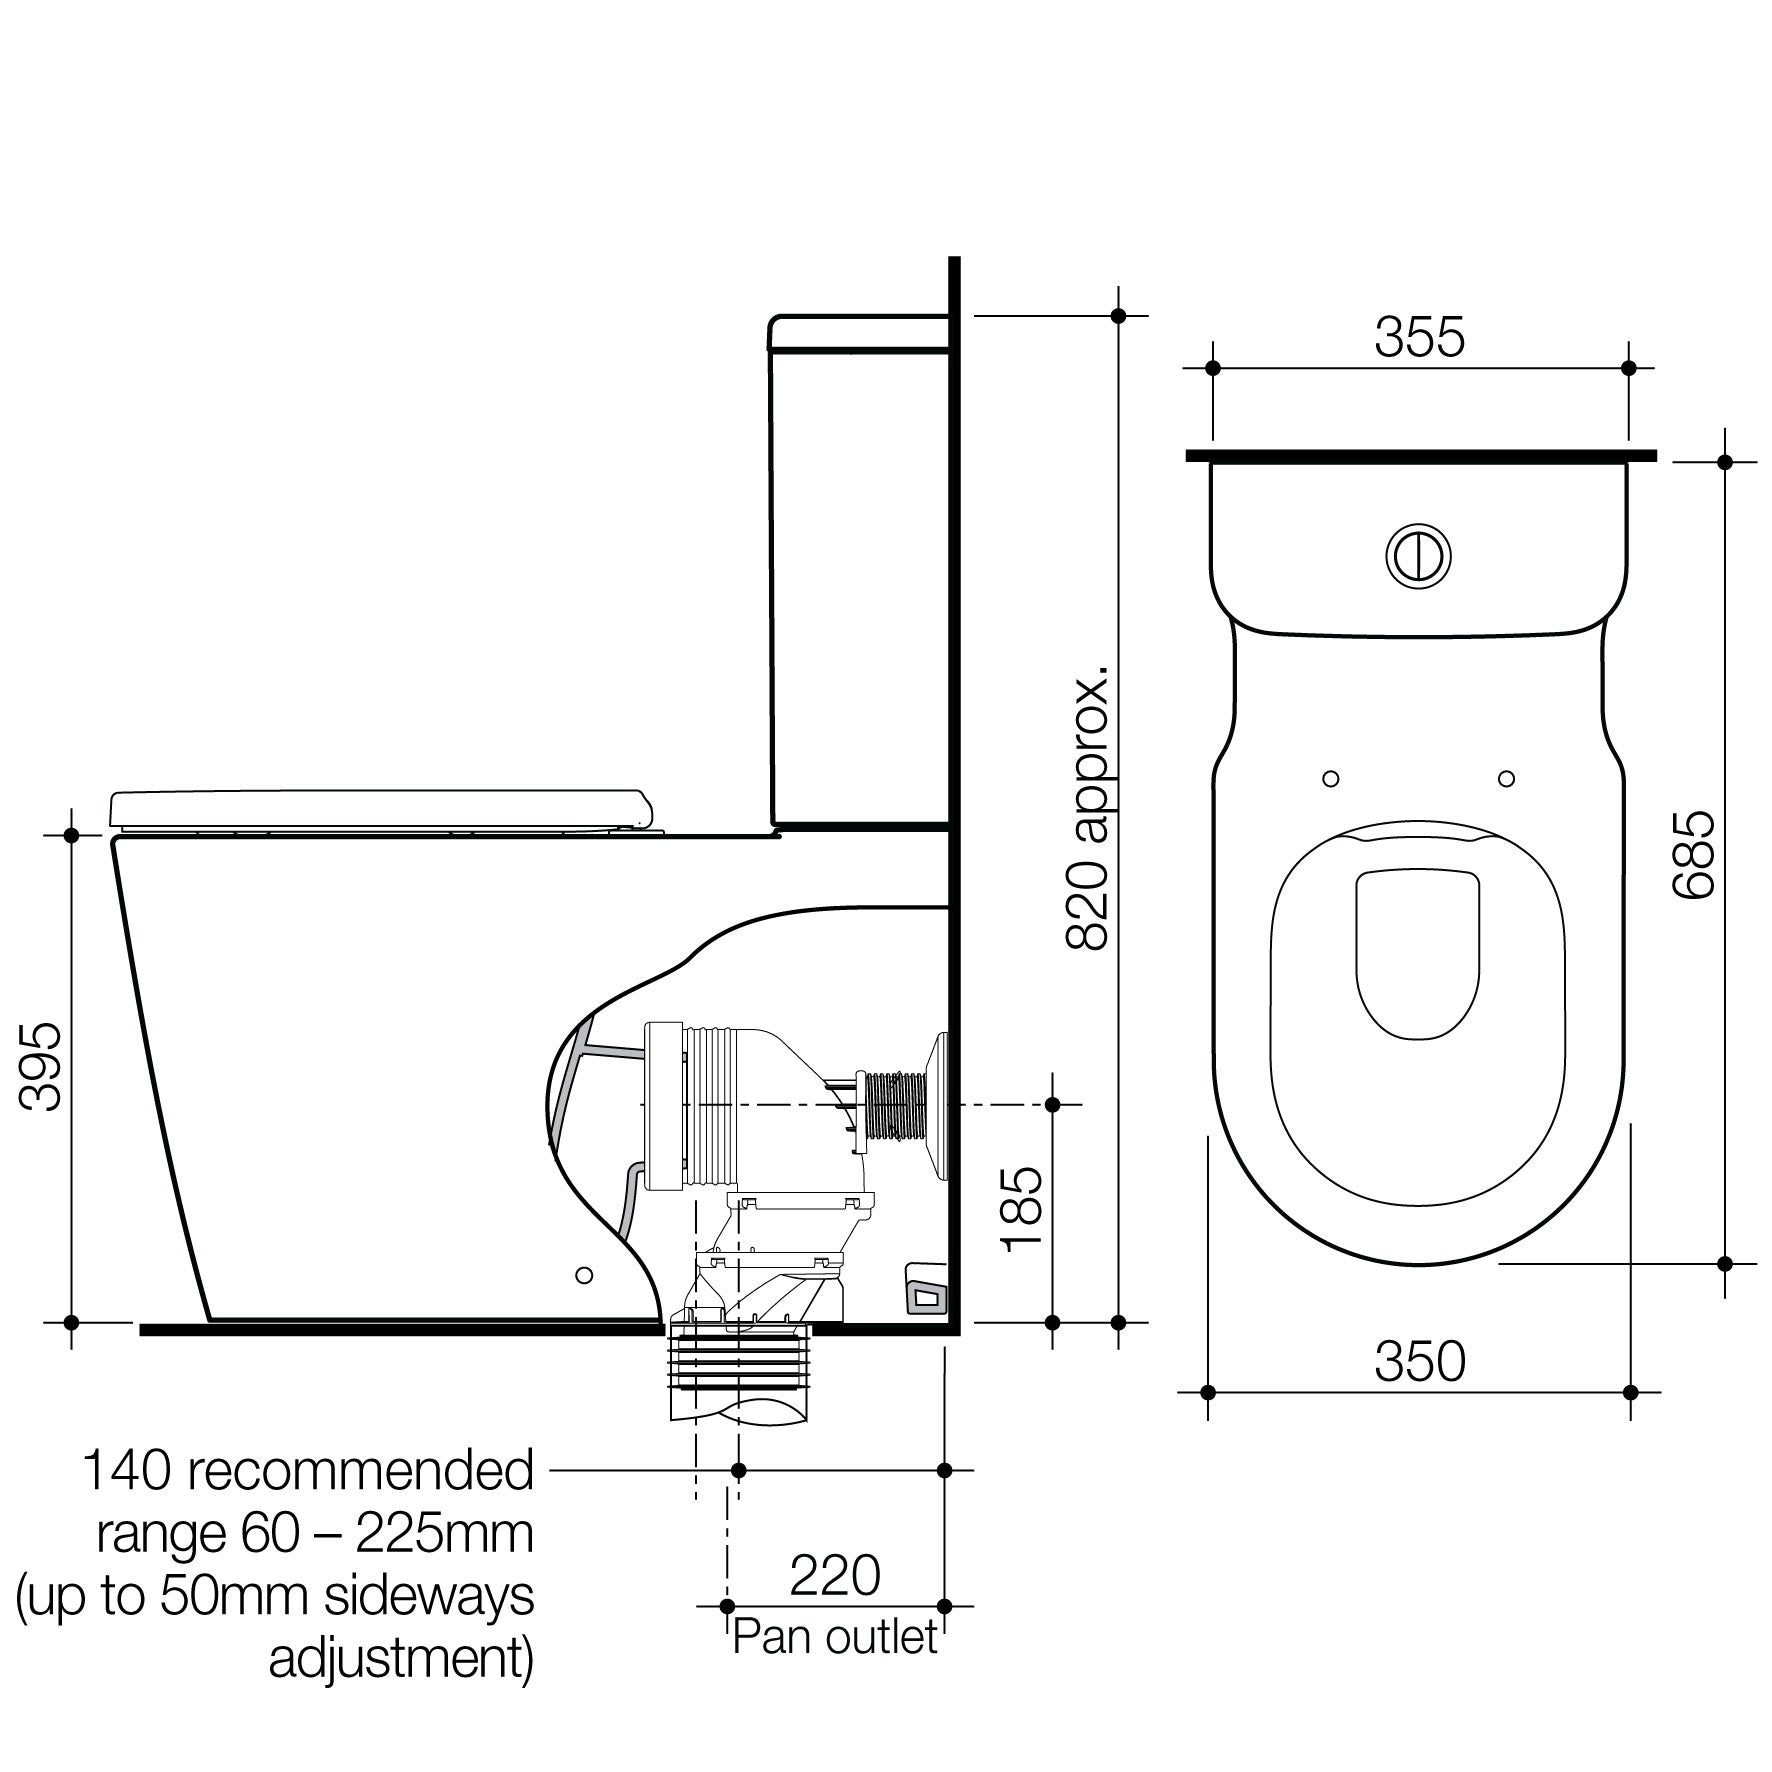 Caroma Elvire Cleanflush Back to Wall Toilet Suite - Dimensions